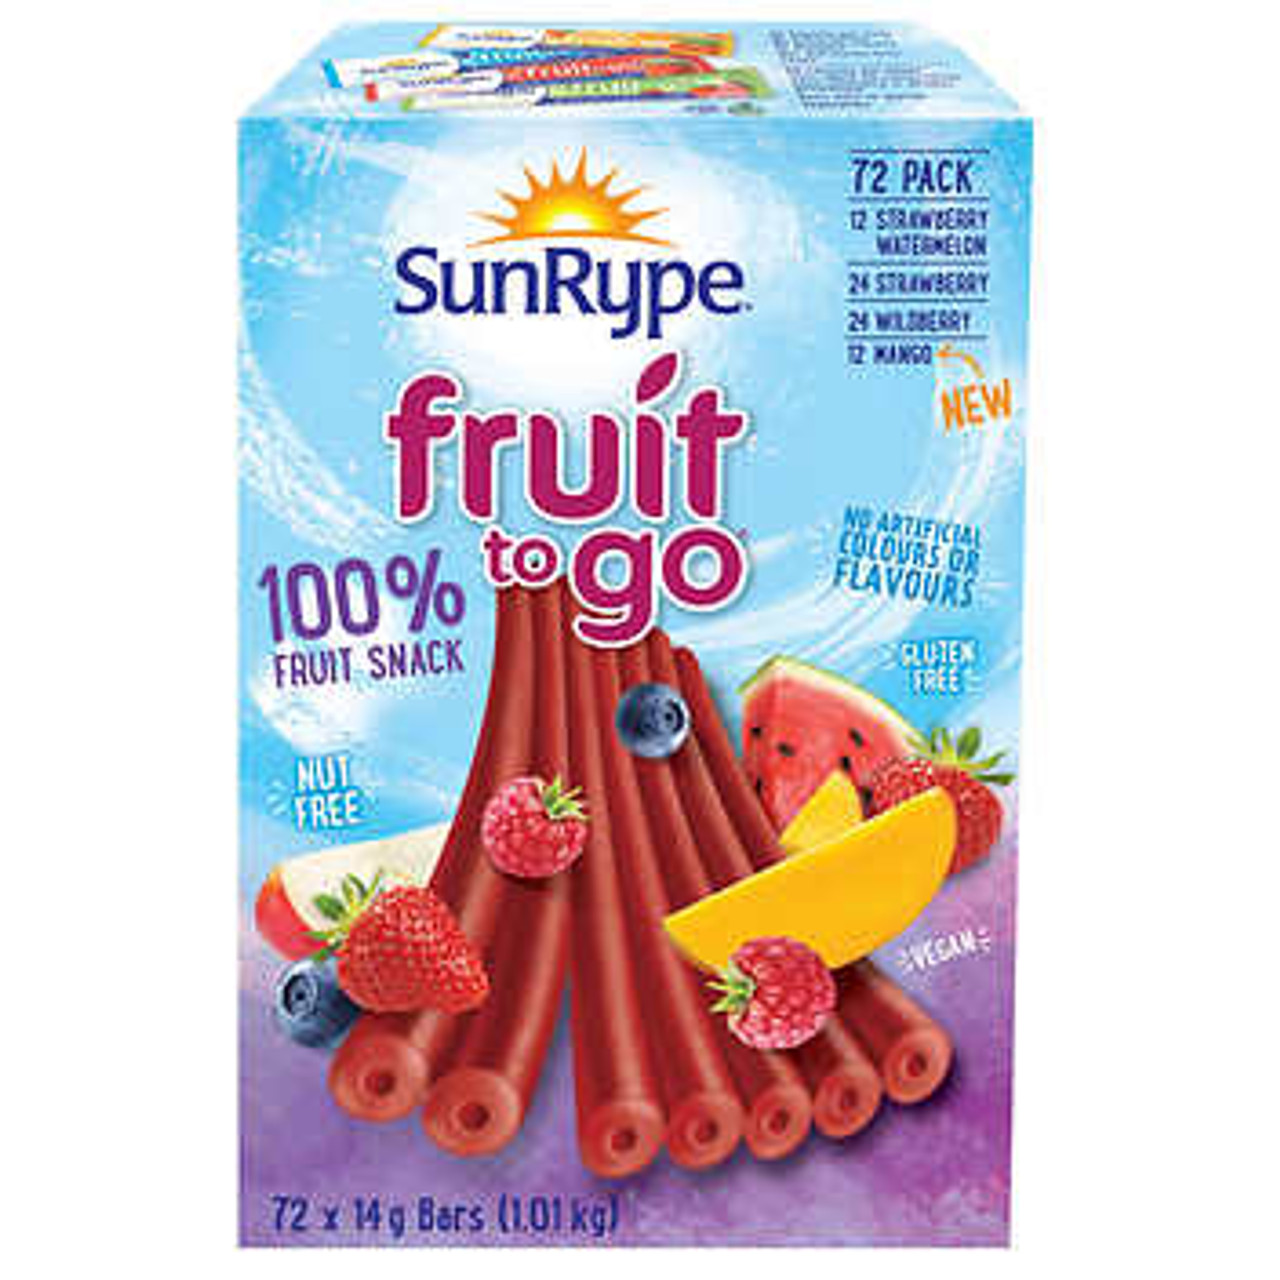 SunRype Fruit To Go Fruit Snacks - 72 Packs, 14g Each - Bursting with Natural Fruit Goodness- Chicken Pieces